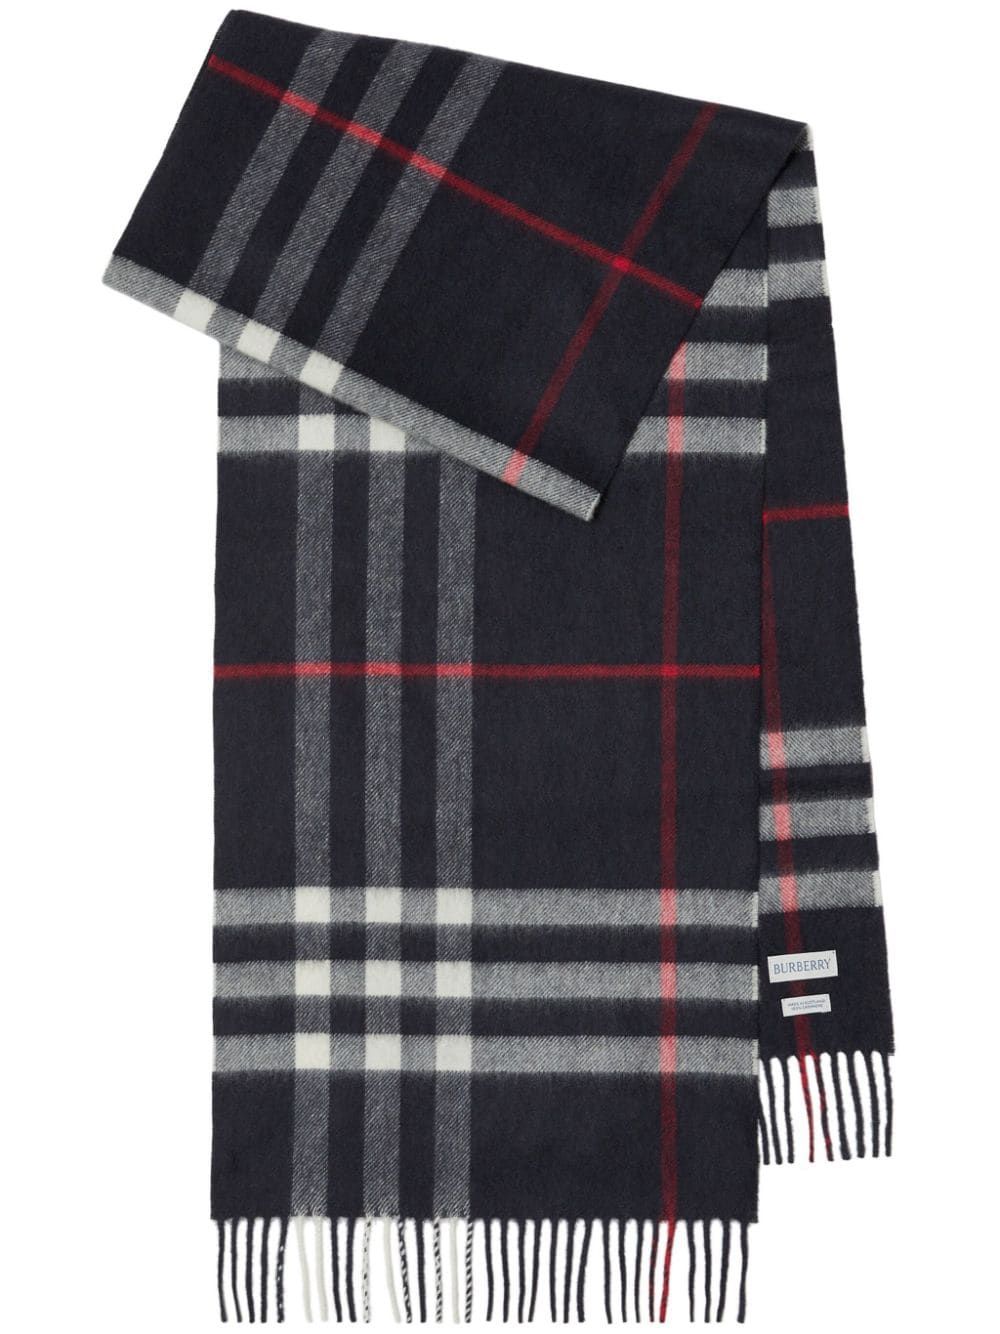 BURBERRY Luxurious Navy Cashmere Scarf for Men - FW24 Collection